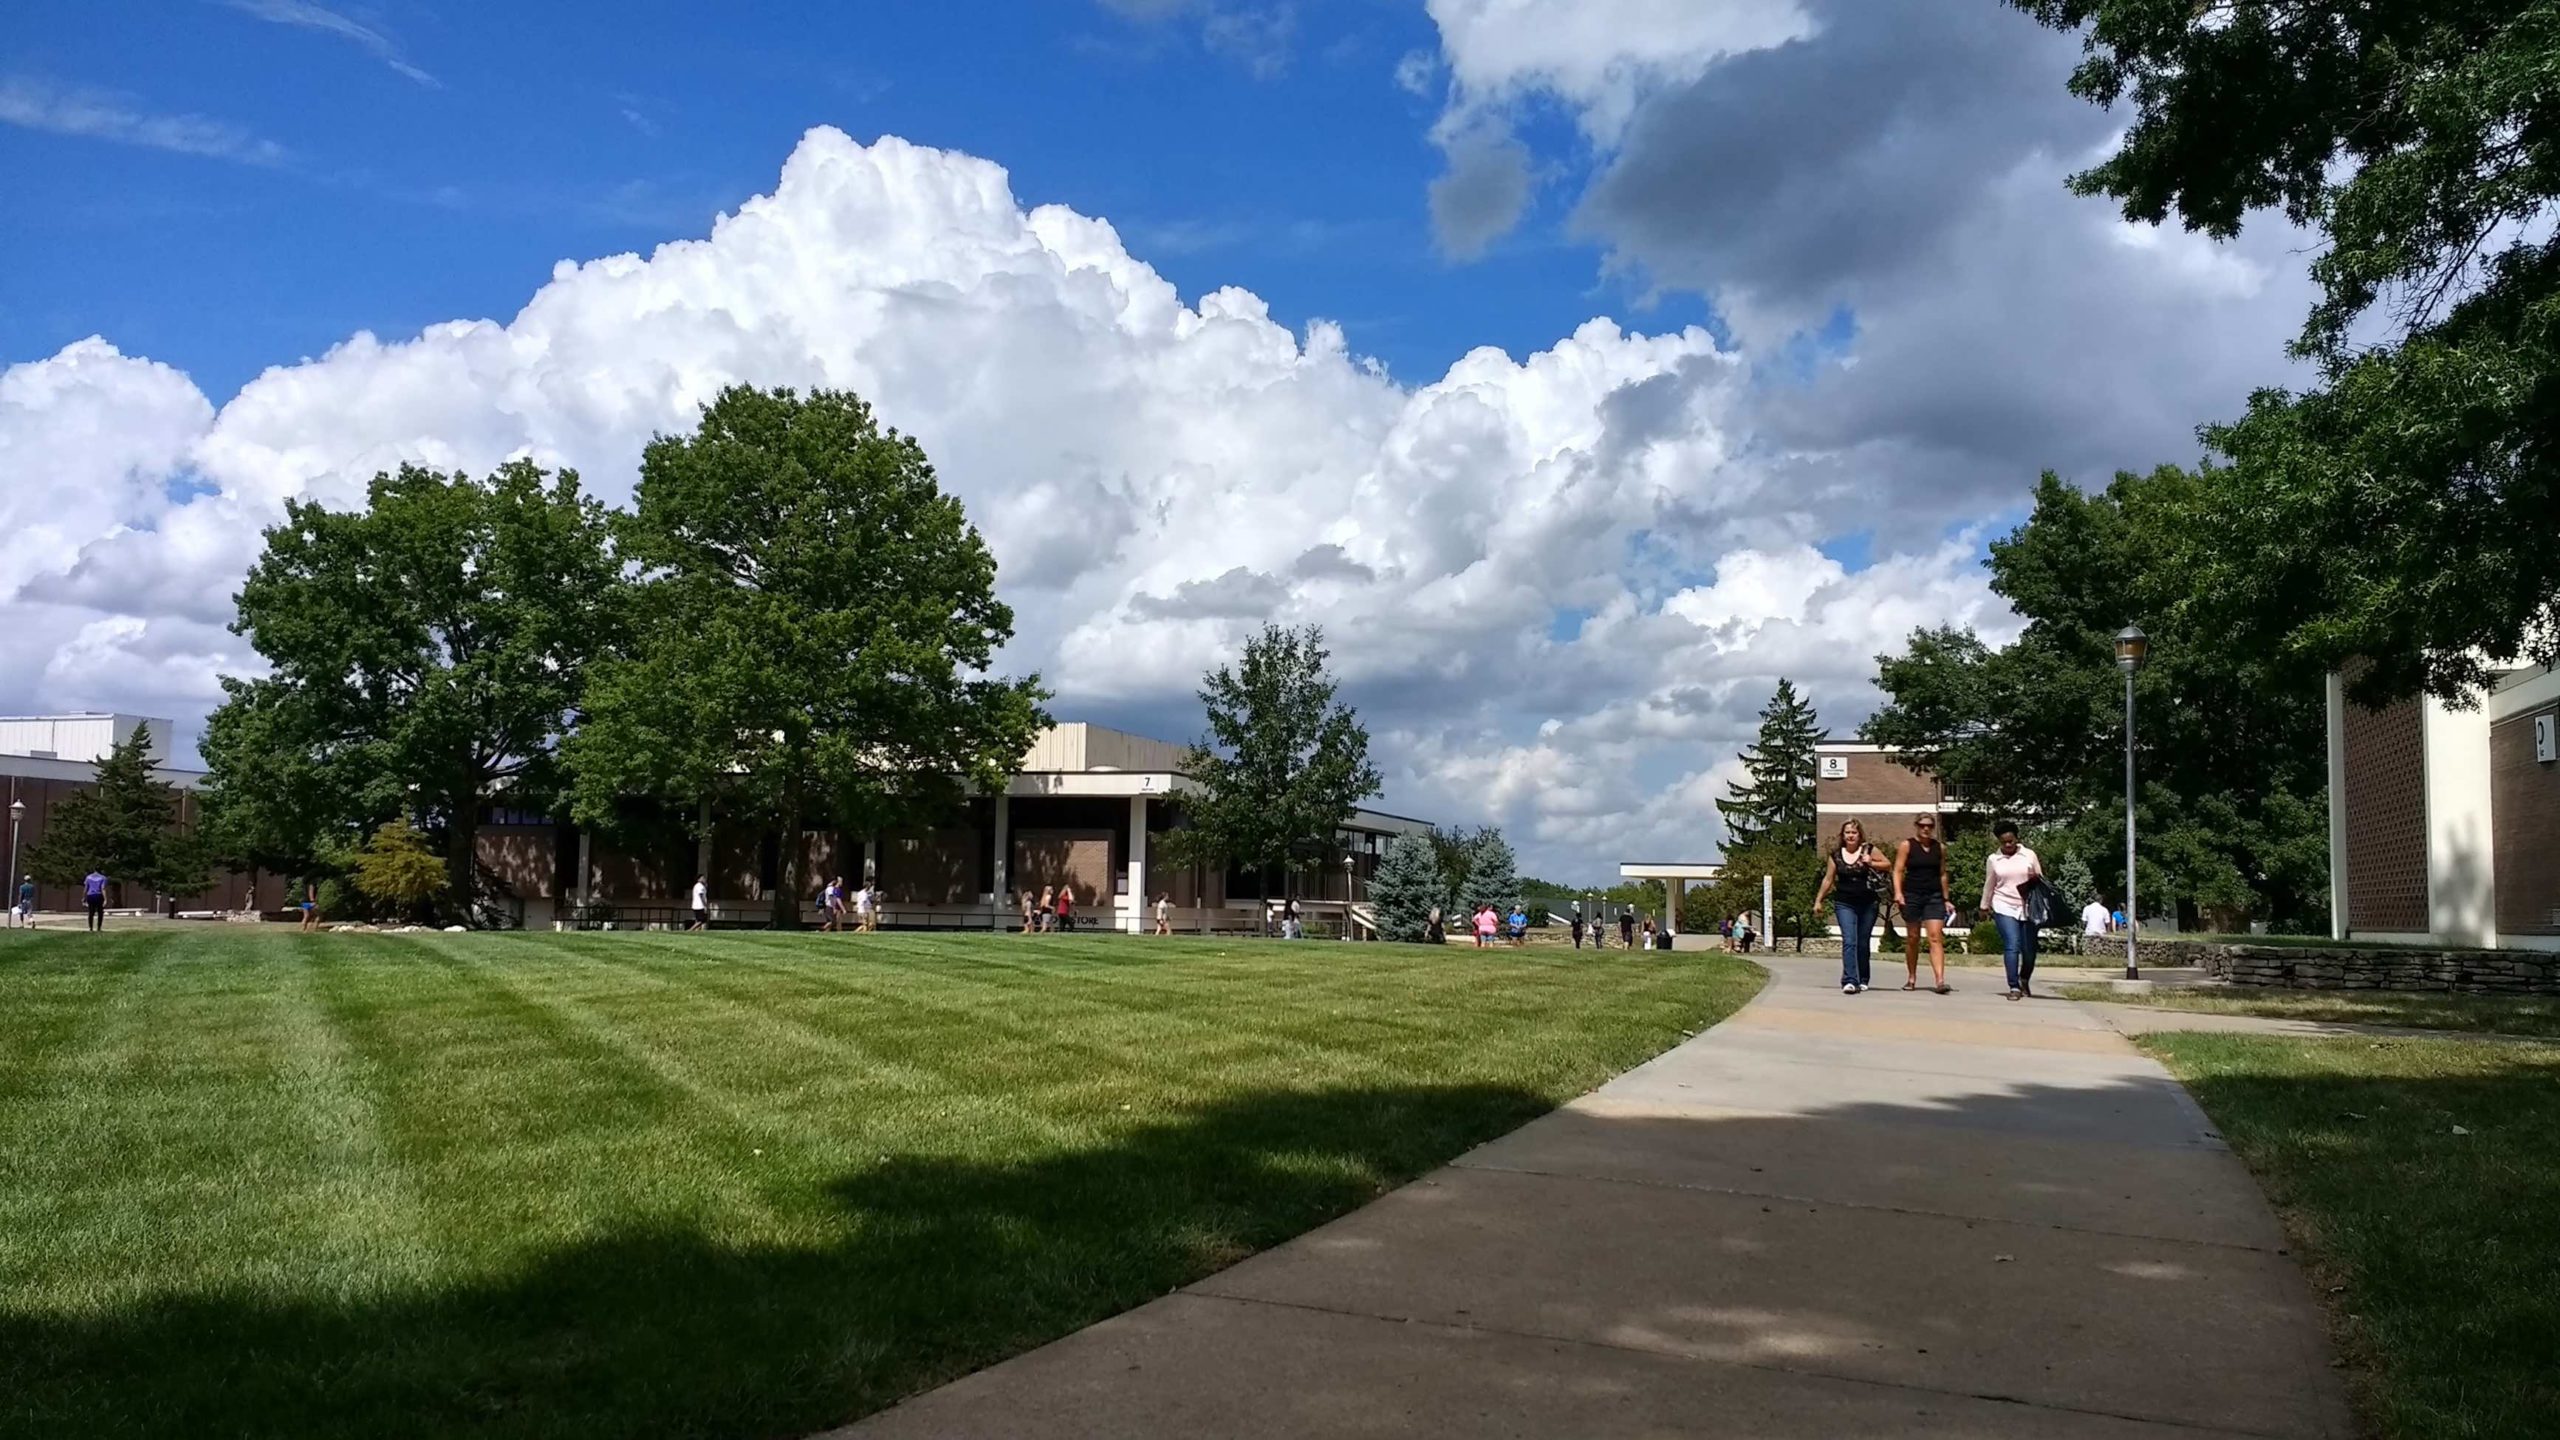 Exterior shot of the campus Quad with students walking along the sidewalks.